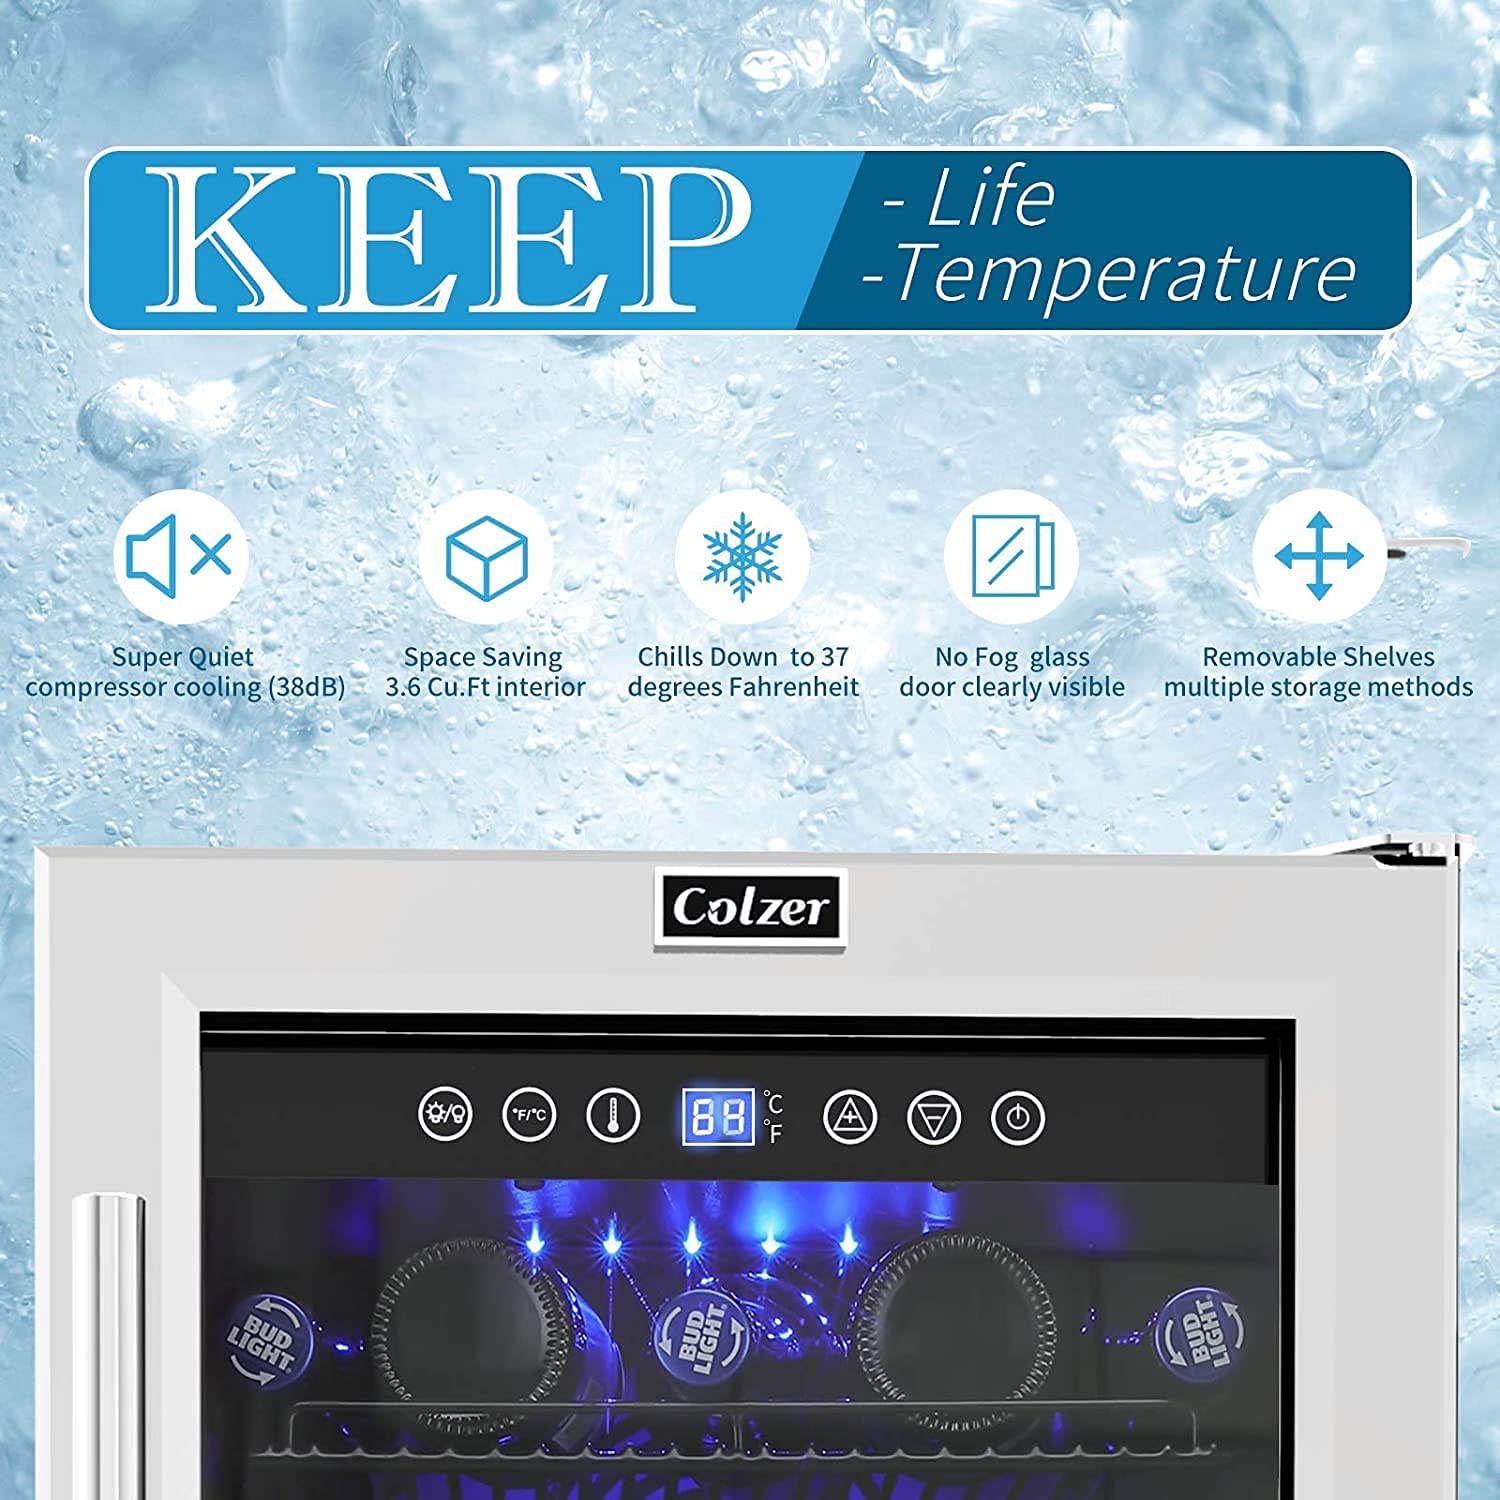 10 Best 15 Inch Wine Cooler Refrigerator 2022 Review: Top Small Undercounter Built-in Wine Fridges All In One Cooling Gear Lab: Any Refrigerators Air Conditioners Freezers Ice Makers Coolers Fans Reviewed And Compared.